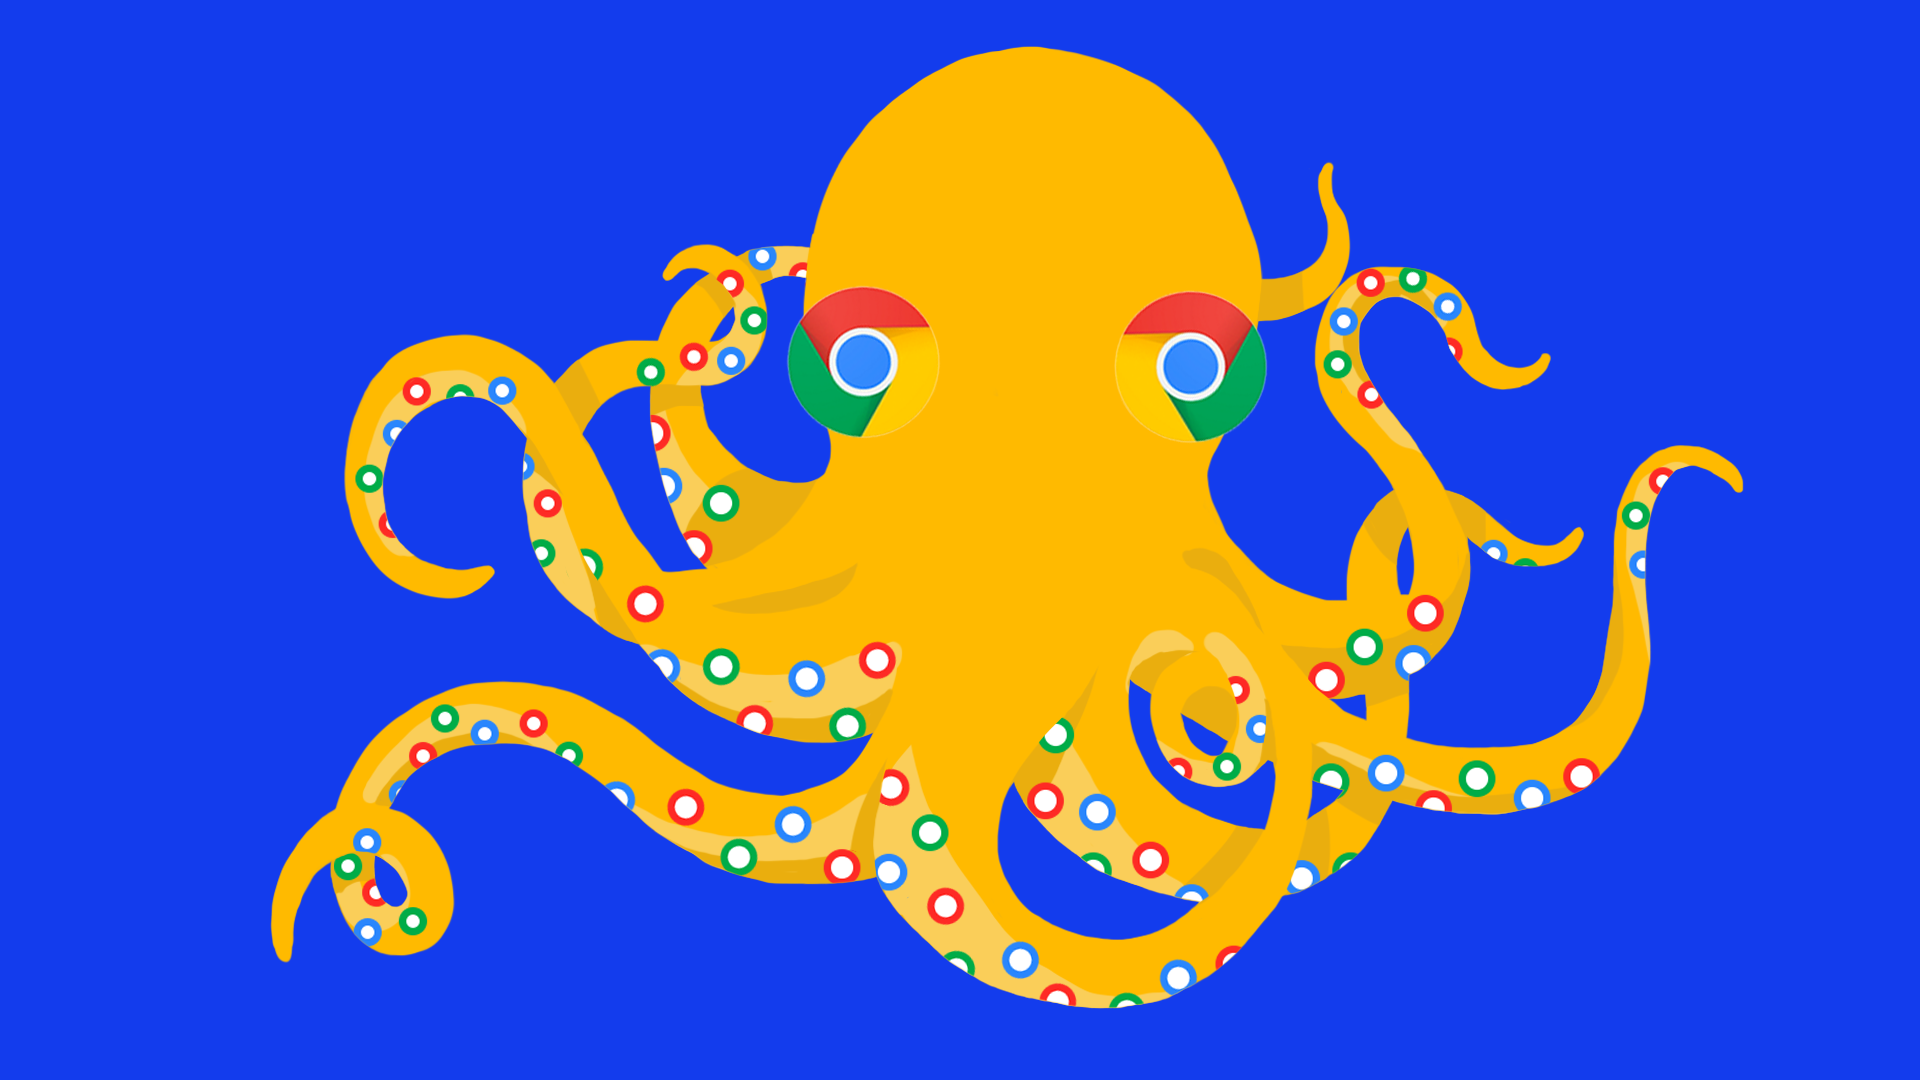 An octopus with Google Chrome logo on it